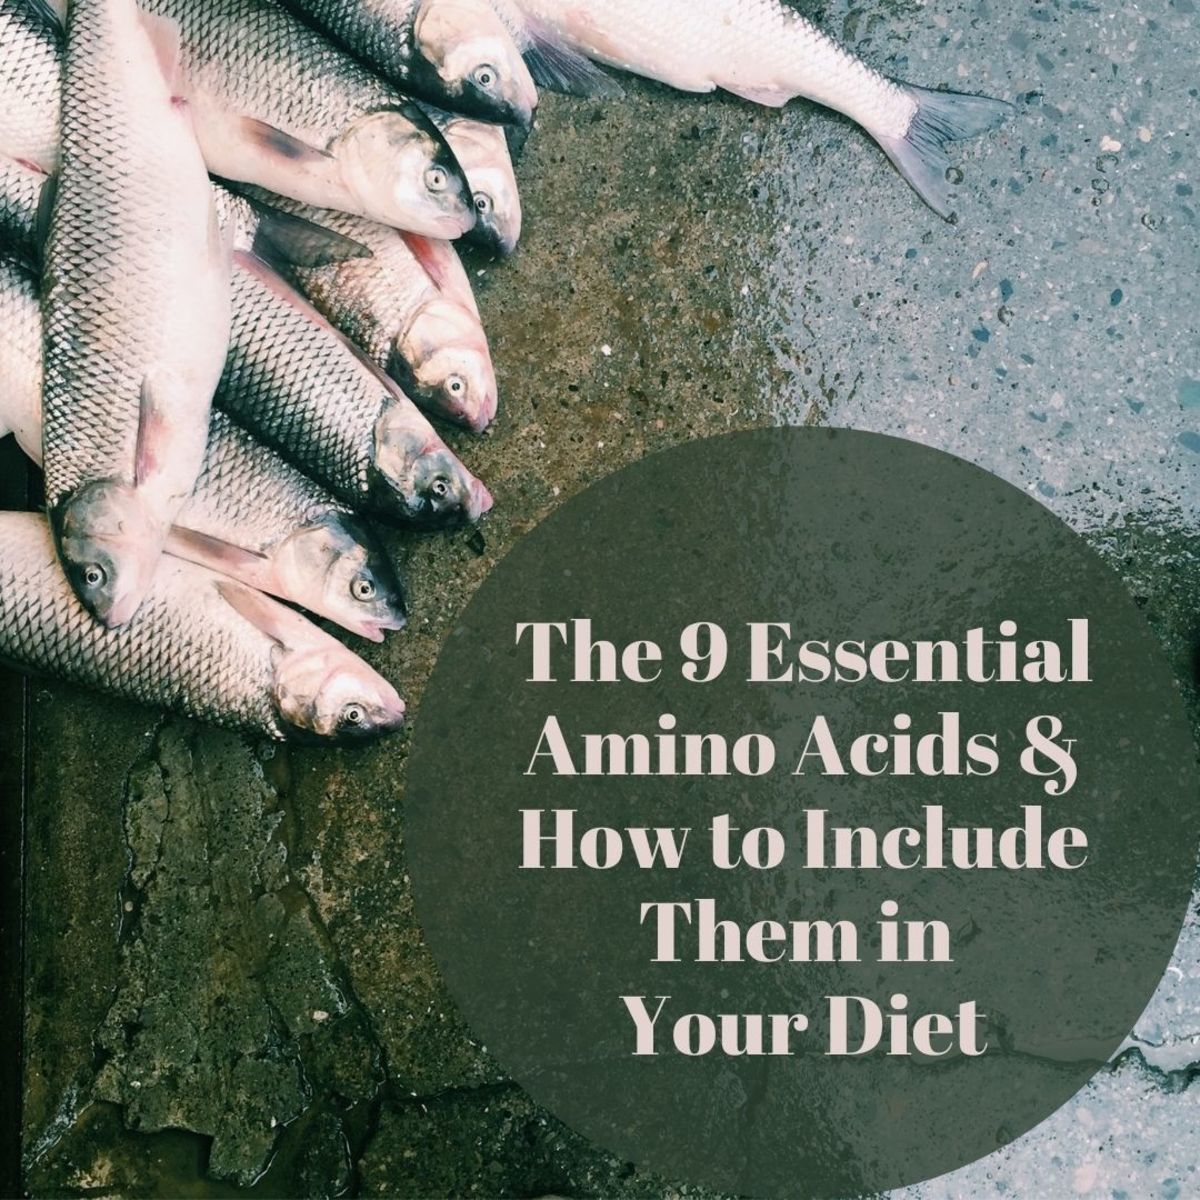 Read on to find out which amino acids are essential and how to incorporate them into your diet.